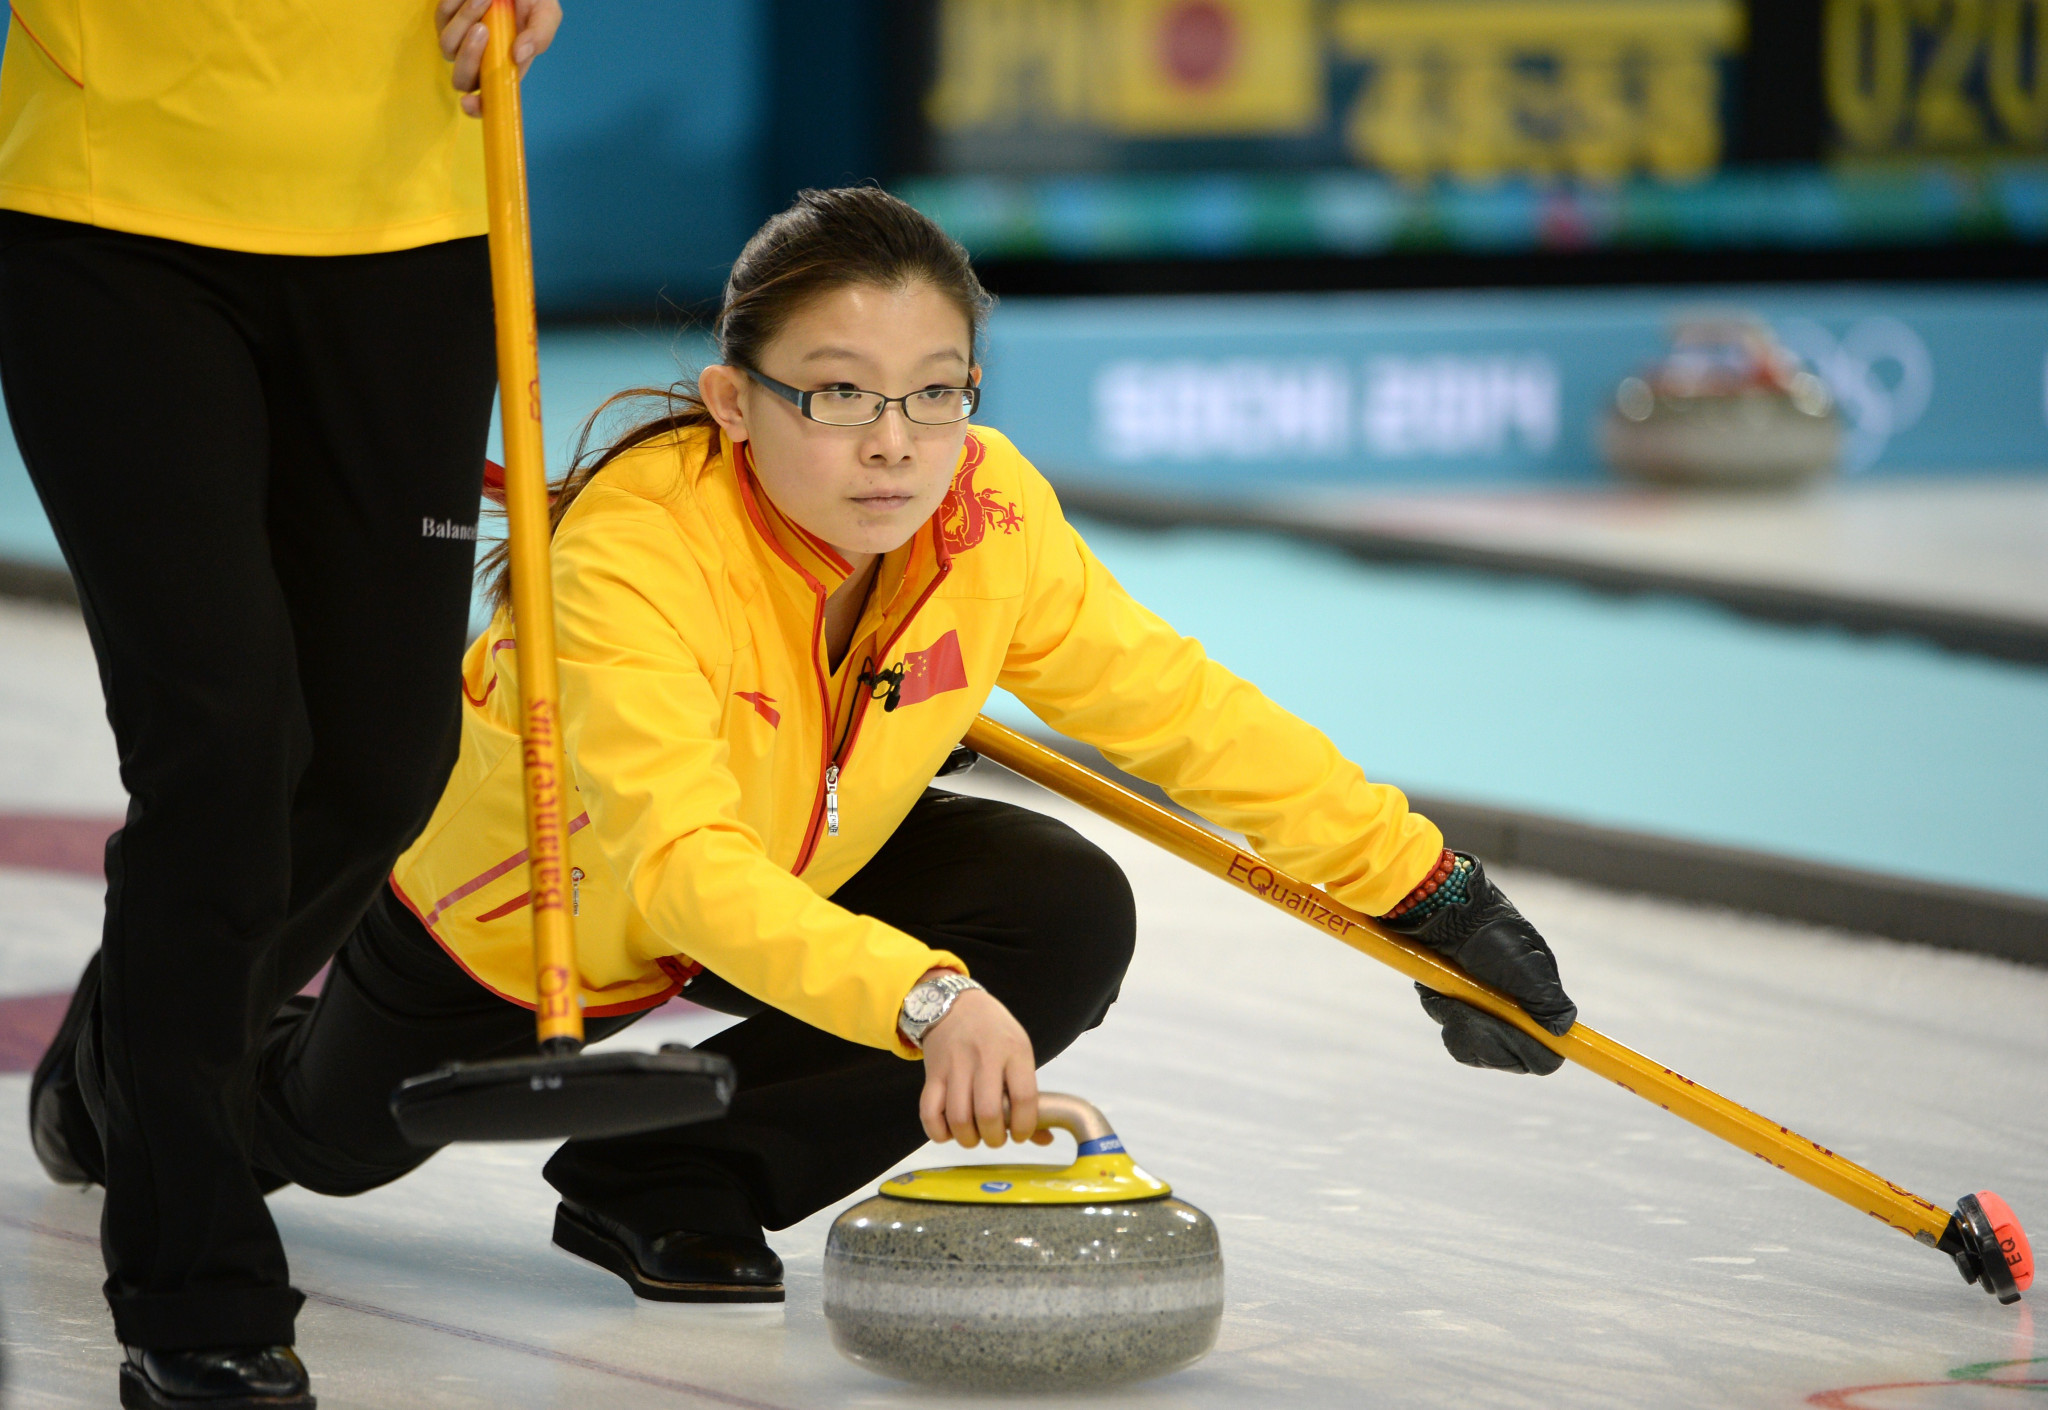 World Championships gold and Olympic bronze medallist Wang Bingyu has been appointed programme director for curling at Beijing 2022 ©Getty Images